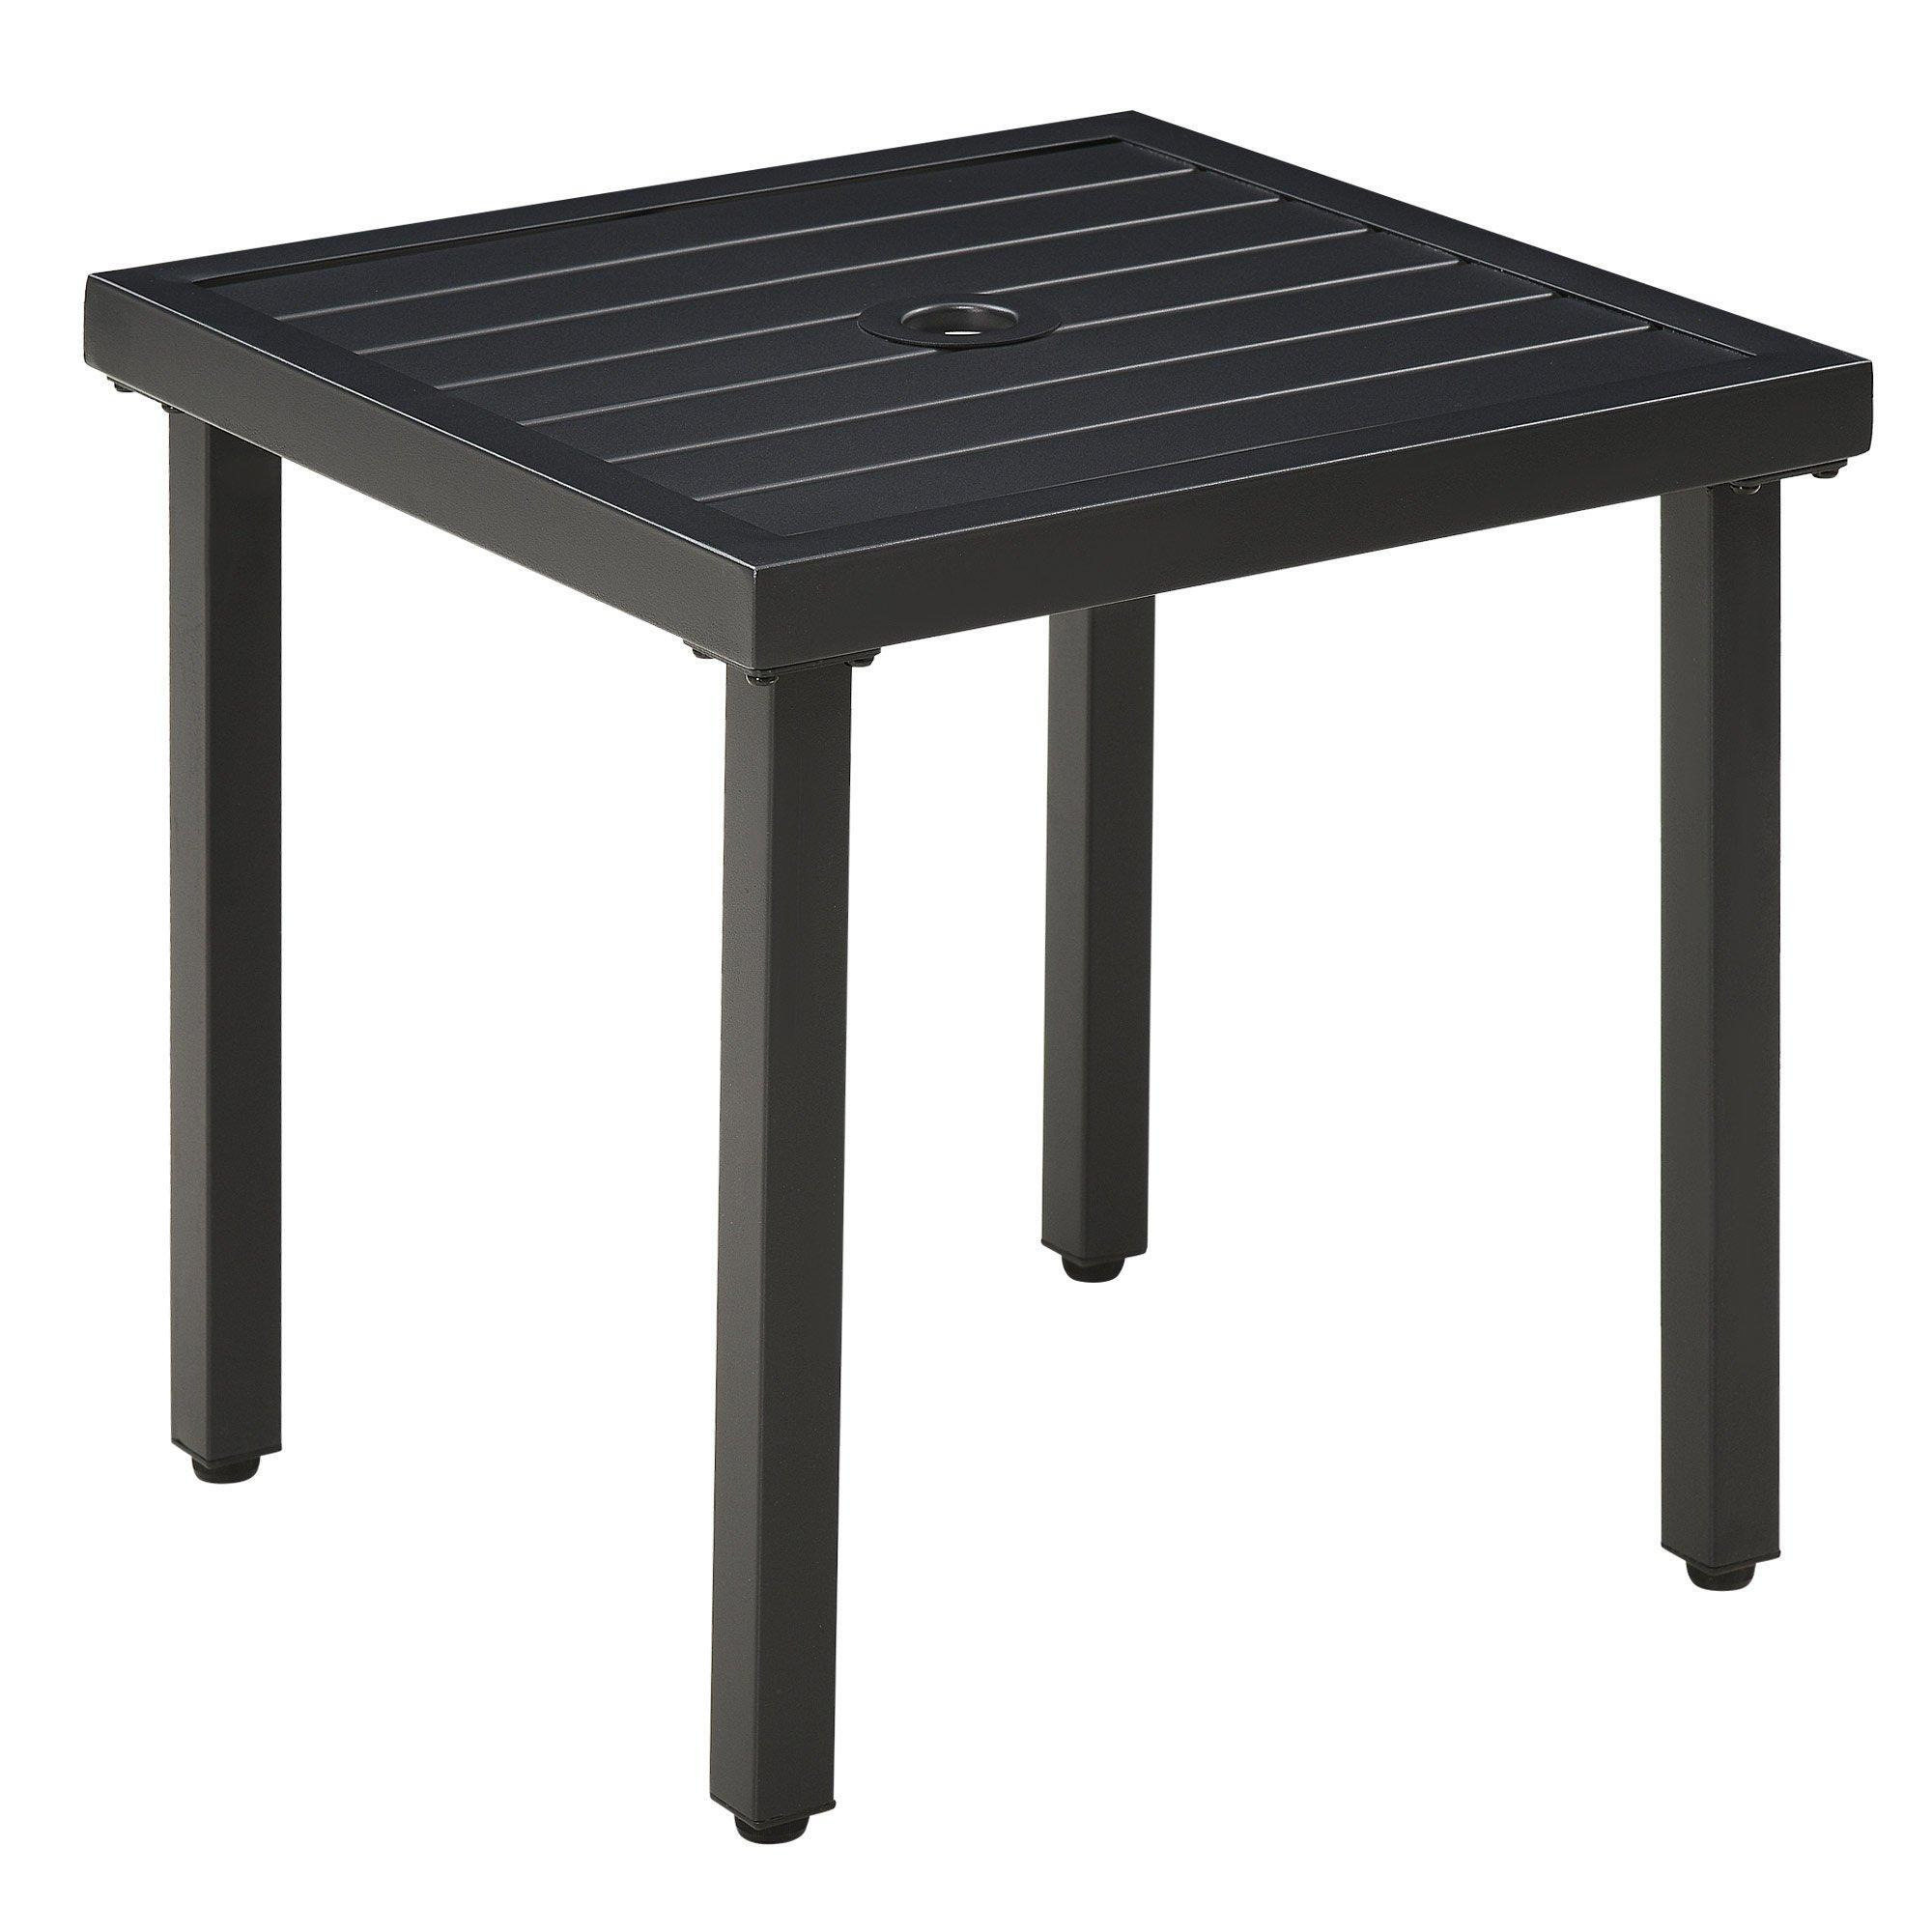 Patio End Table Garden Side Table with Umbrella Hole and Steel Frame - image 1